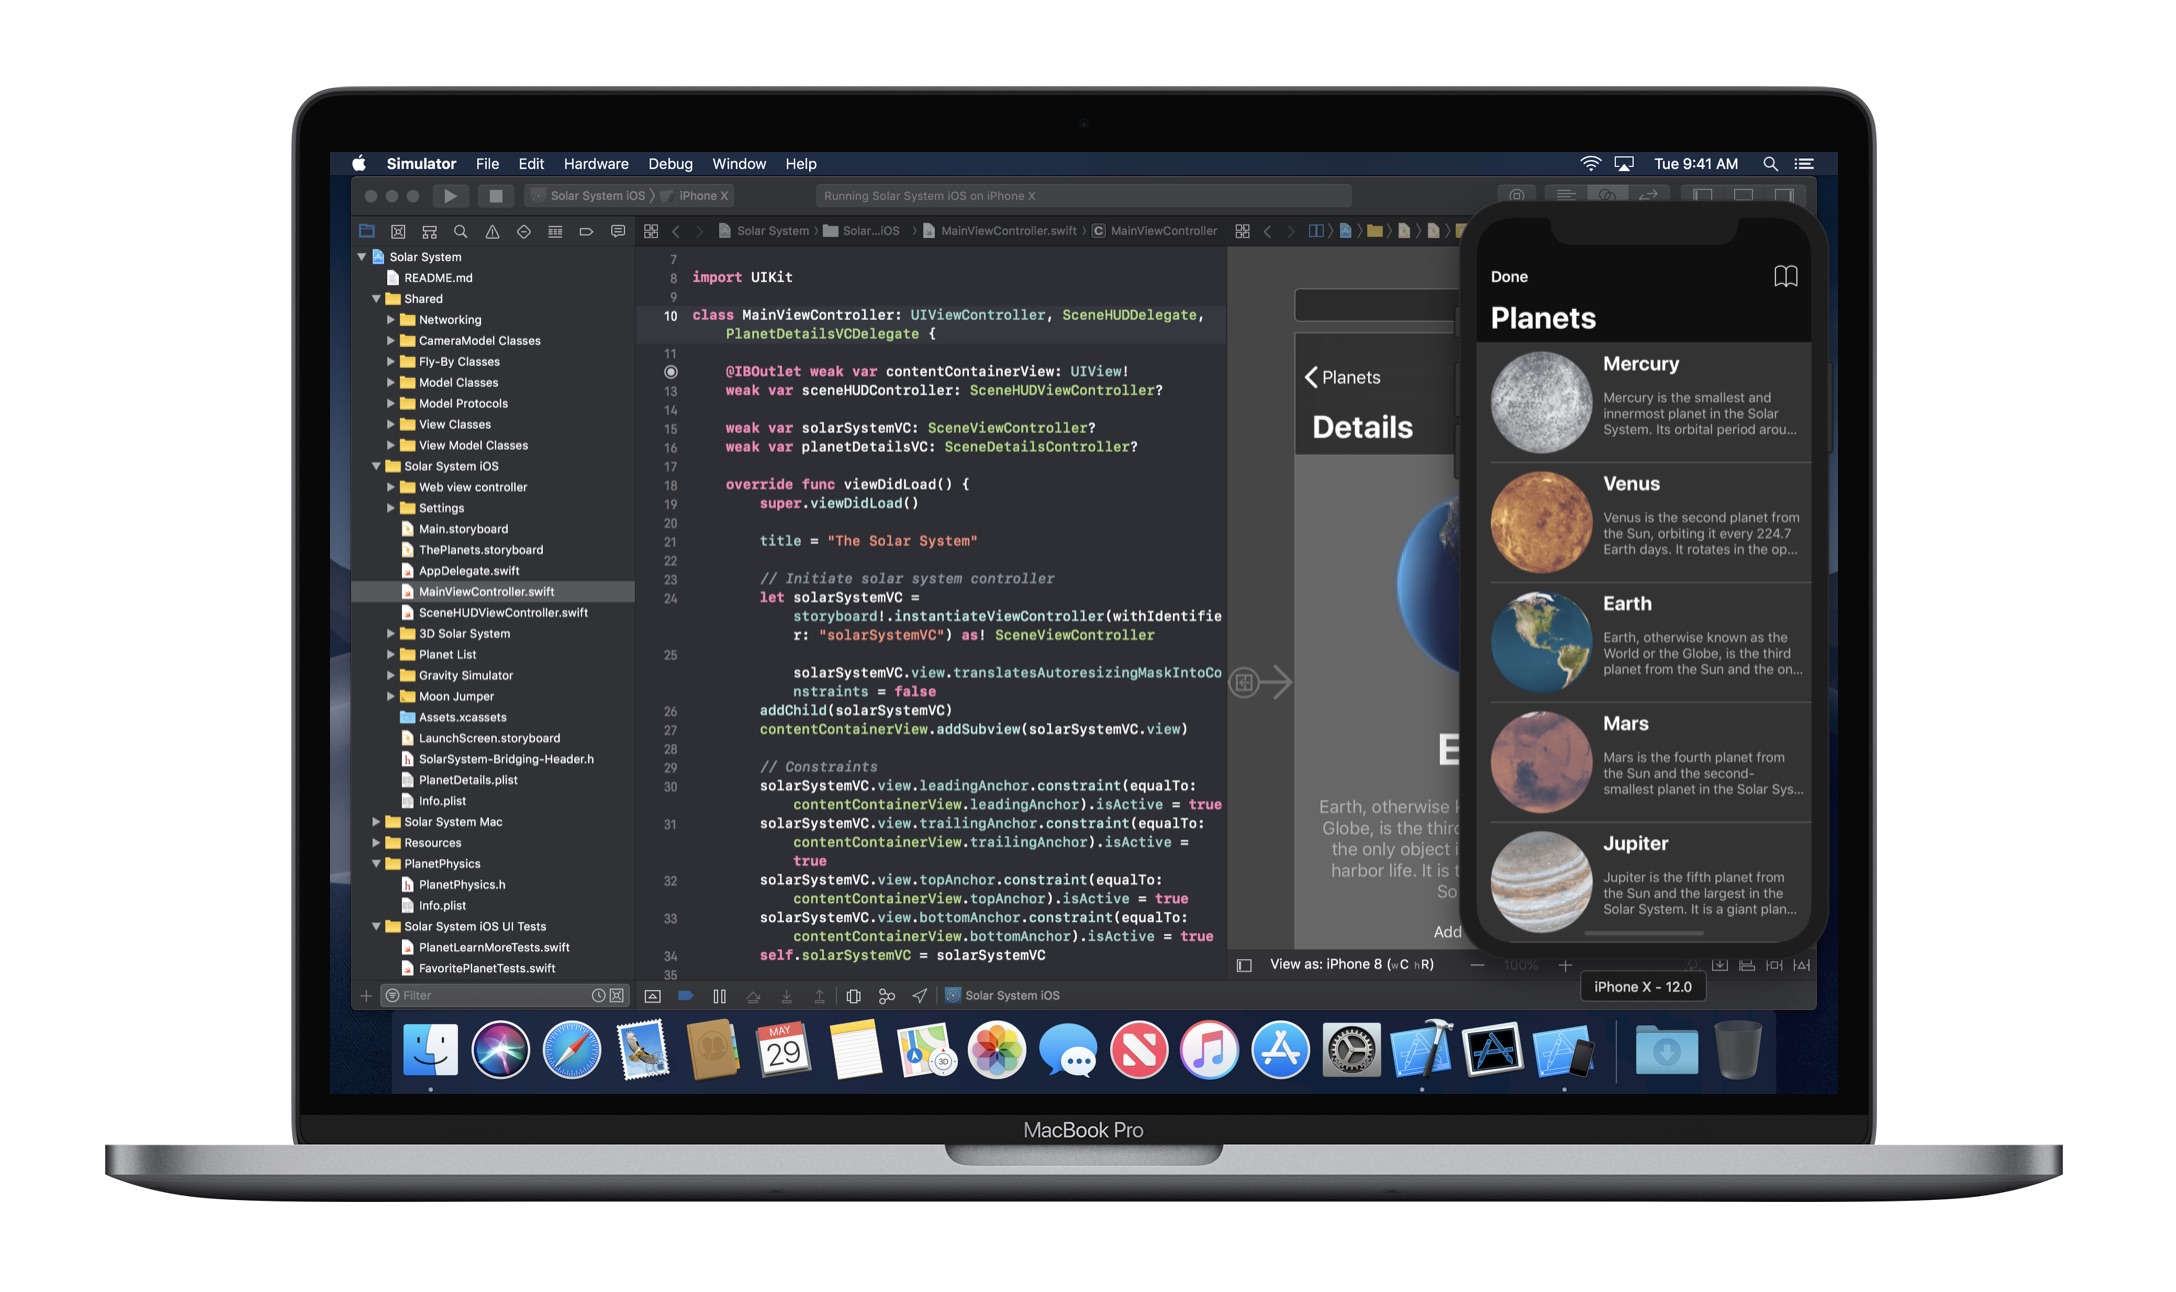 Apple releases xcode 10 ide with dark mode for macos mojave swift 4 2 support 522744 4